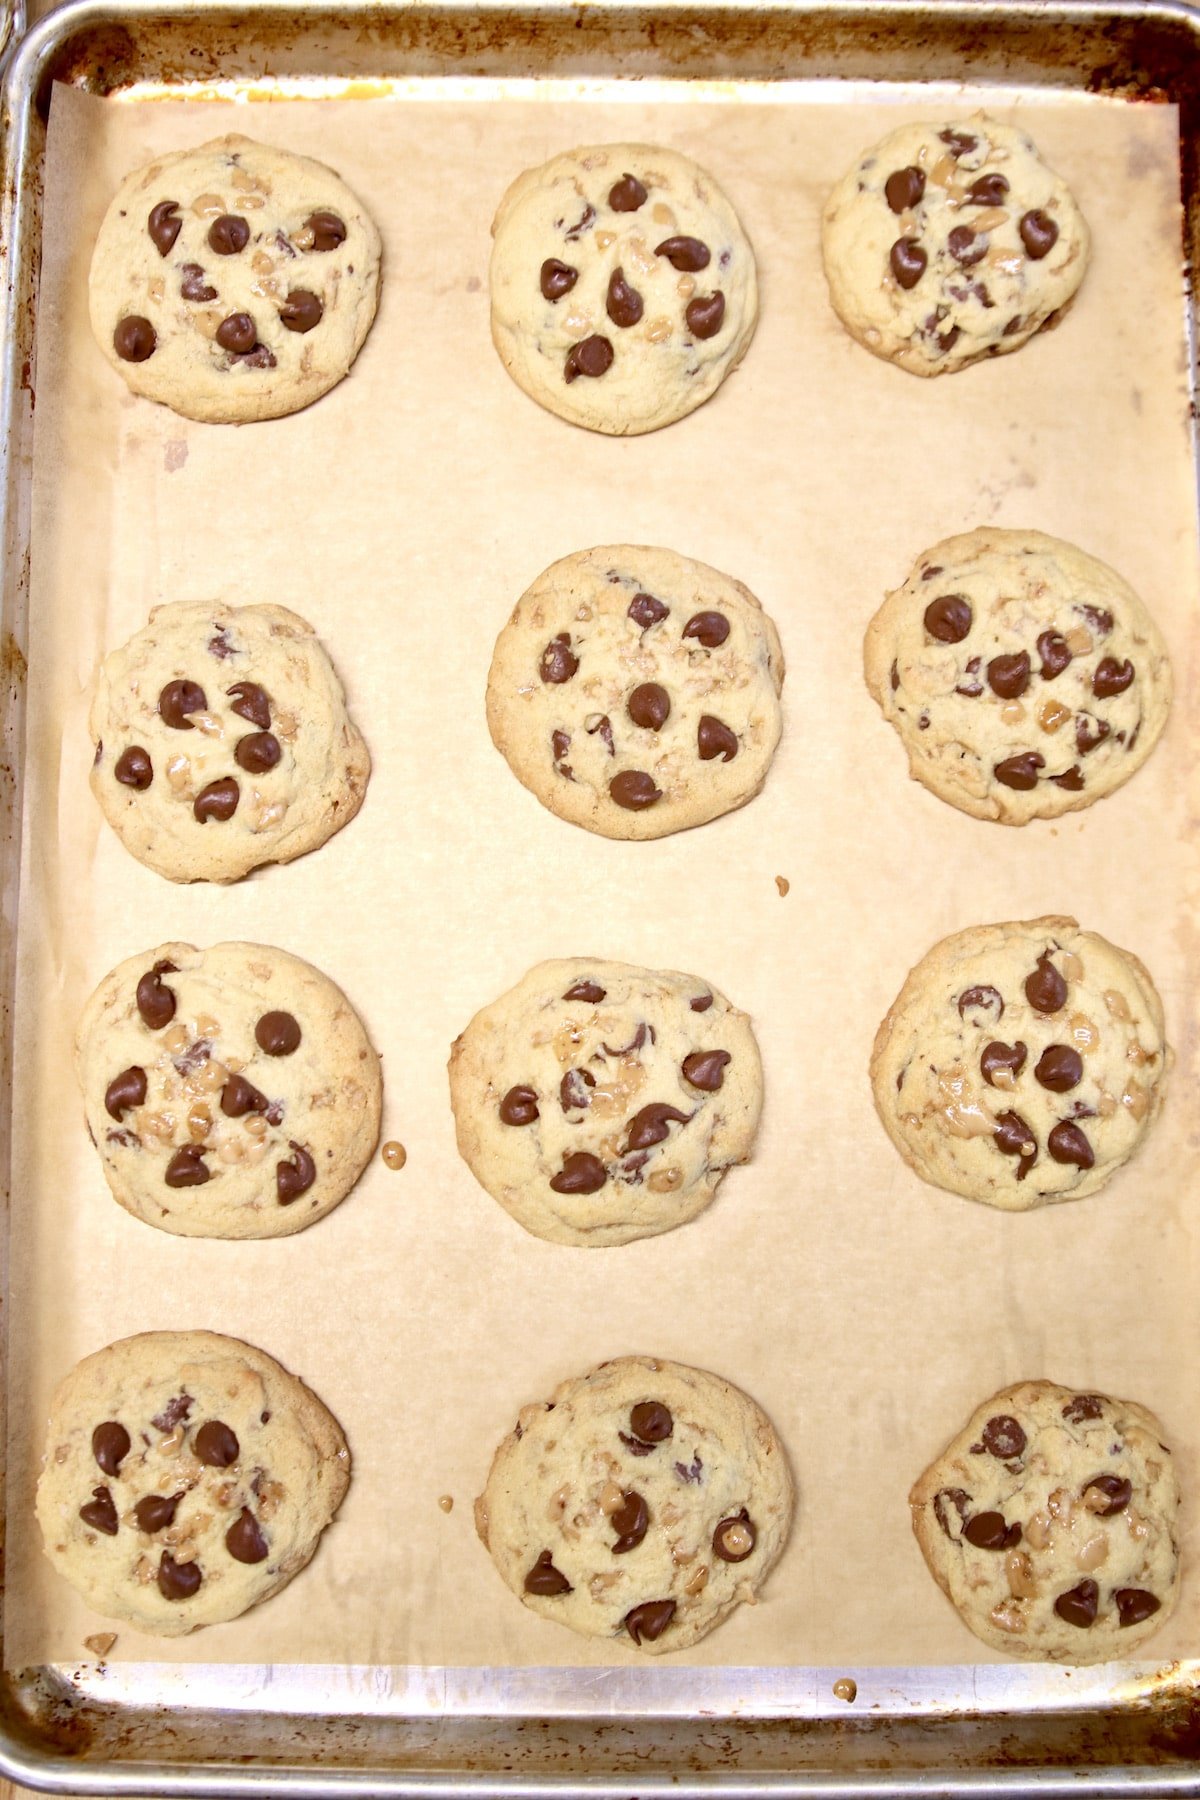 Baked chocolate chip cookies on parchment lined cookie sheet.